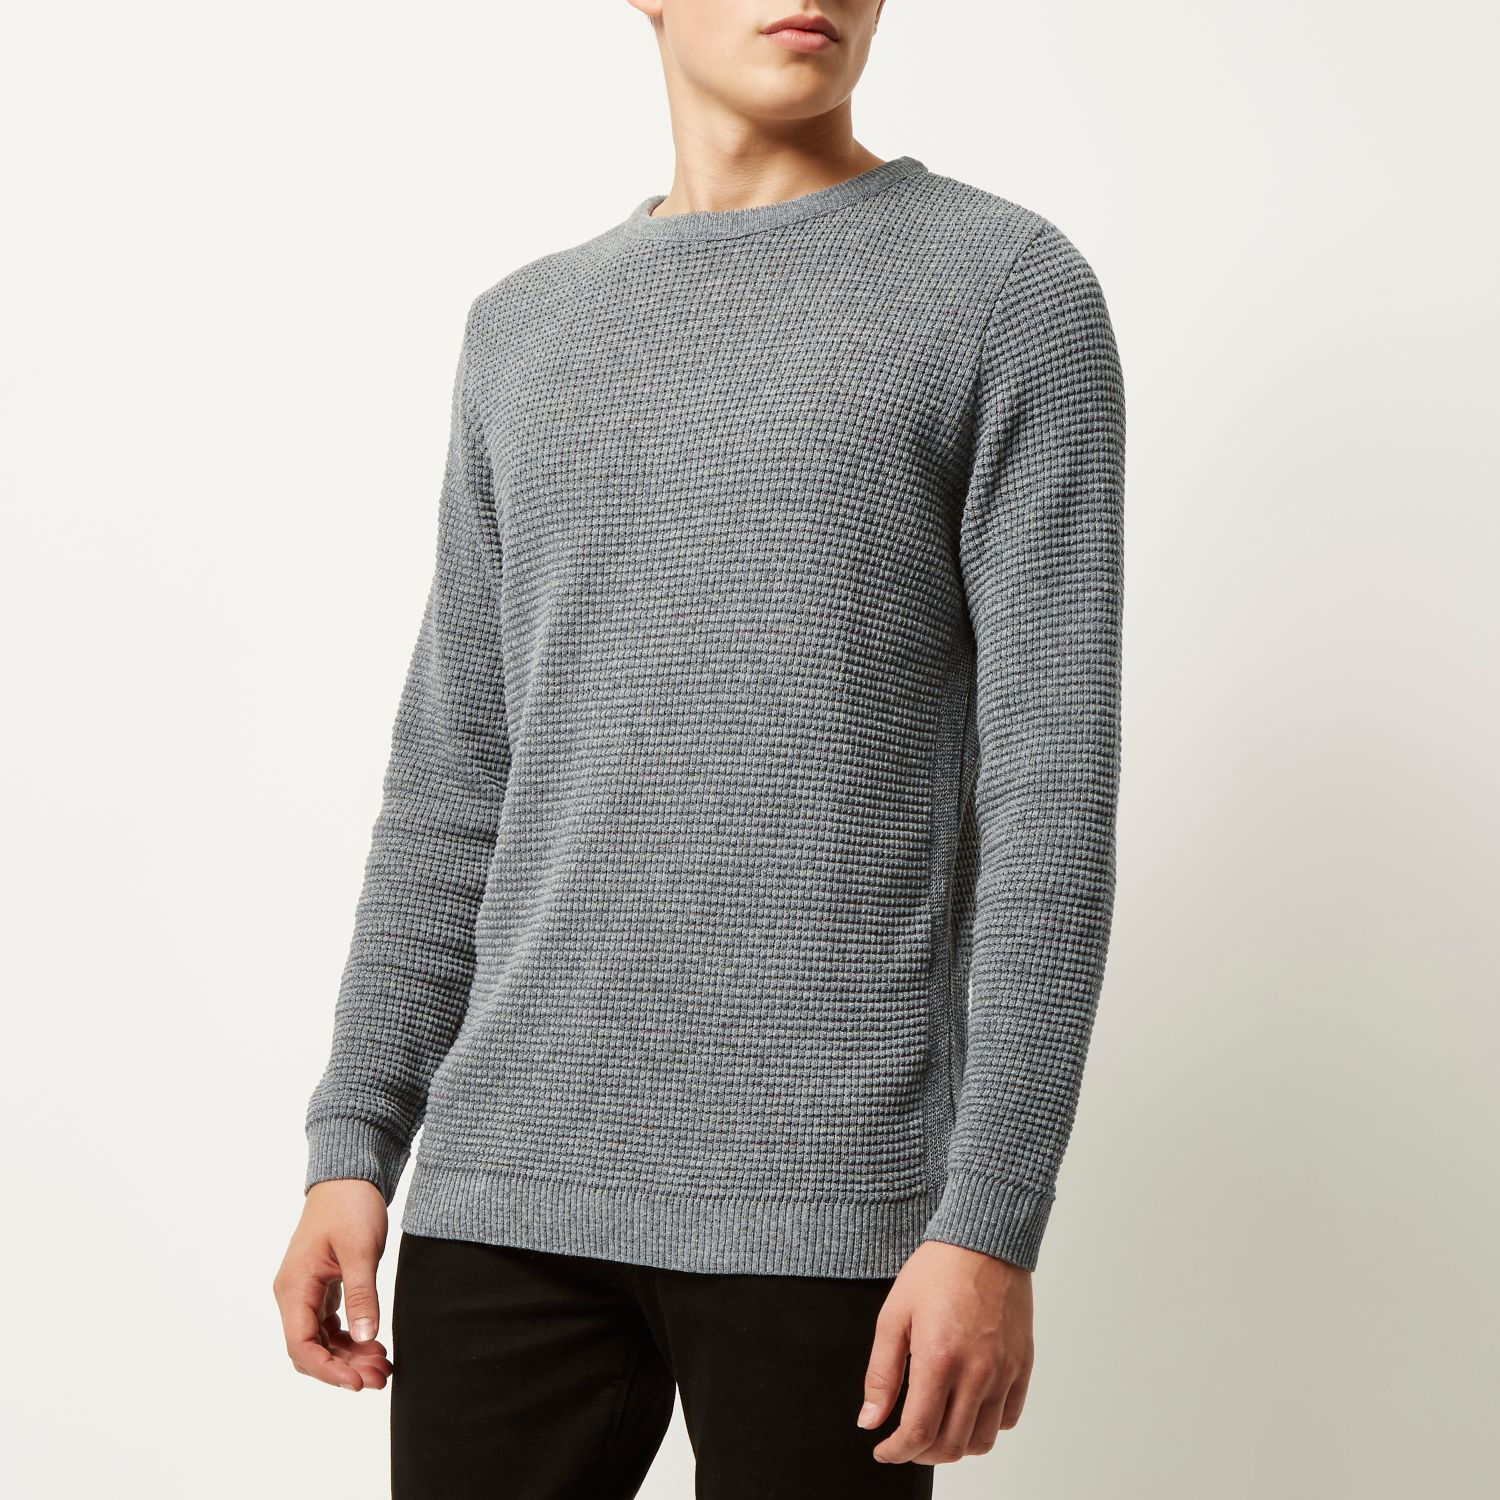 Lyst - River Island Light Grey Cable Knit Jumper in Gray for Men